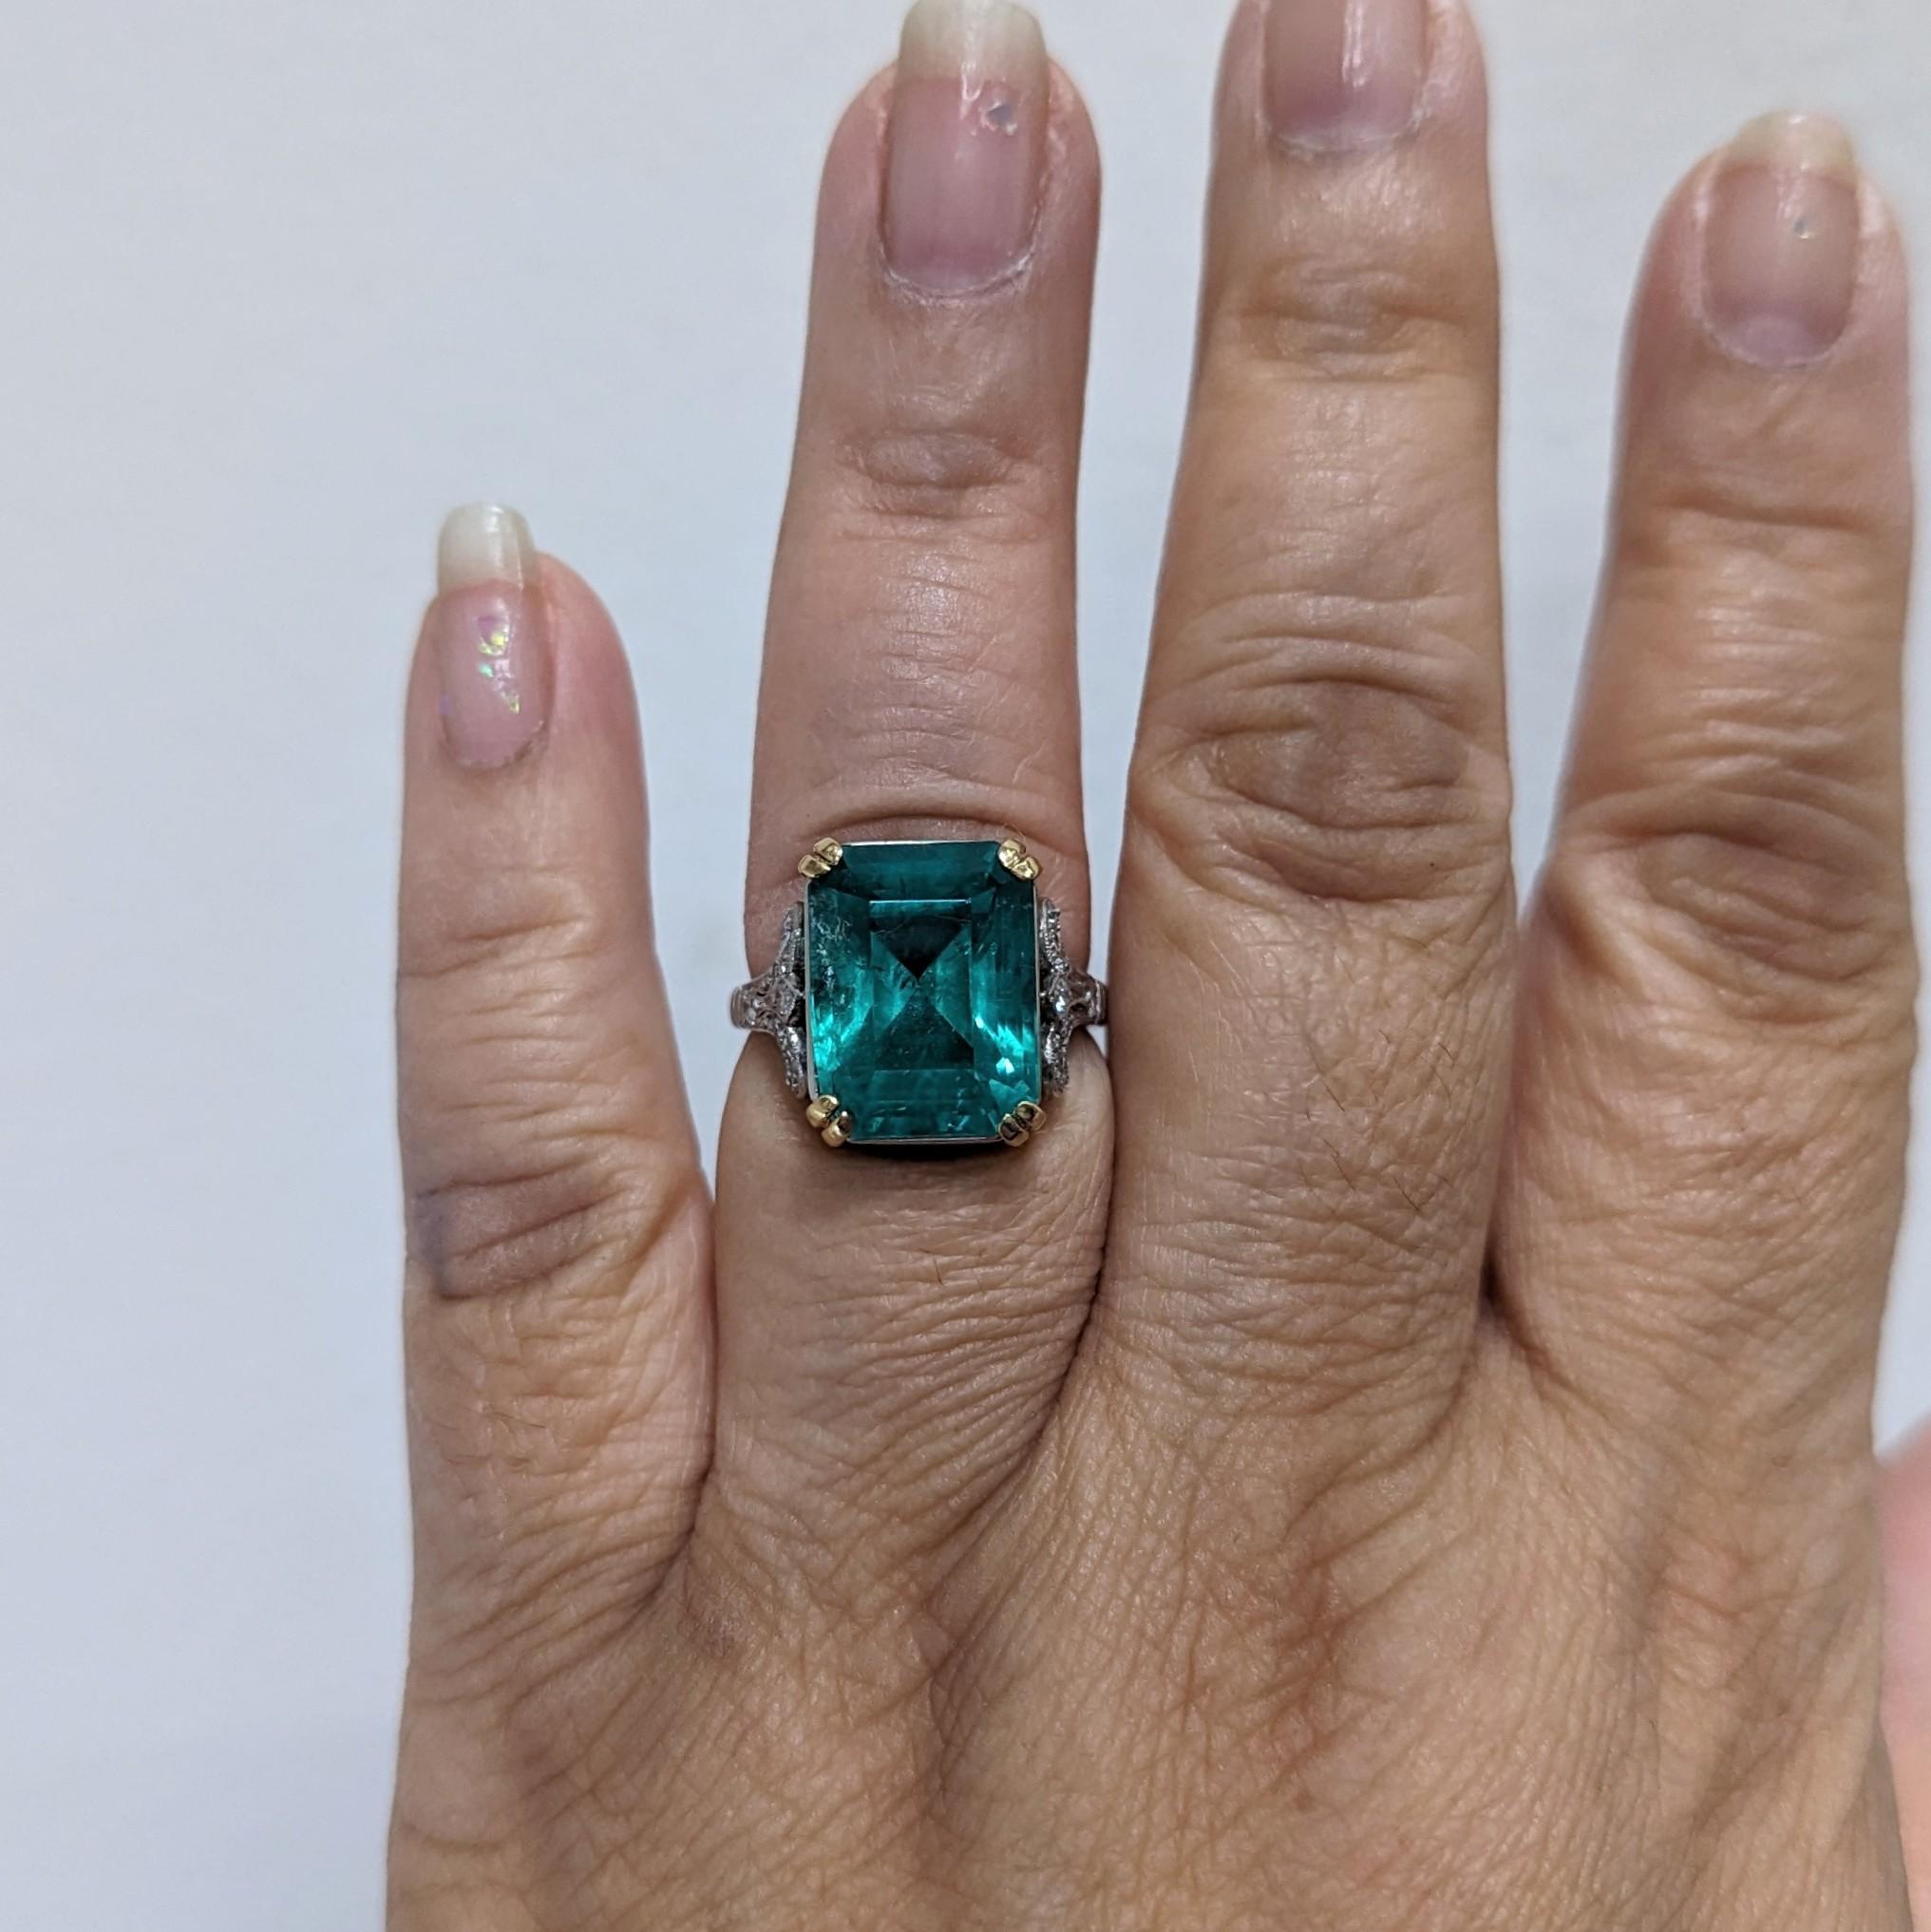 Gorgeous 8.61 ct. emerald emerald cut with good quality, white, and bright diamond rose cut rounds.  Handmade in platinum and 18k yellow gold.  Ring size 7.5.